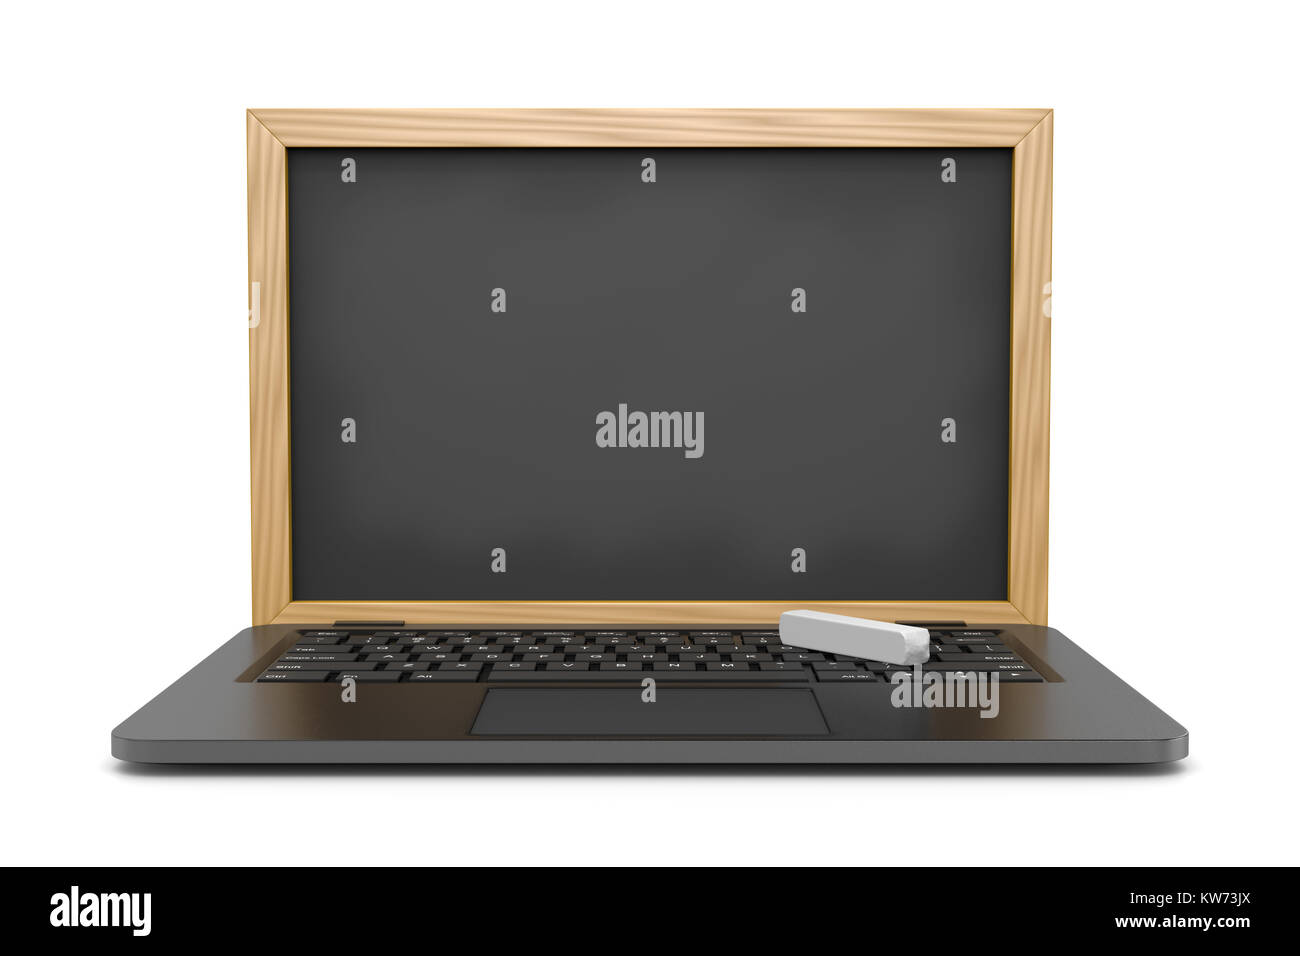 Laptop Computer with a Blank Blackboard Instead of the Display 3D Illustration on White, E-learning Concept Stock Photo